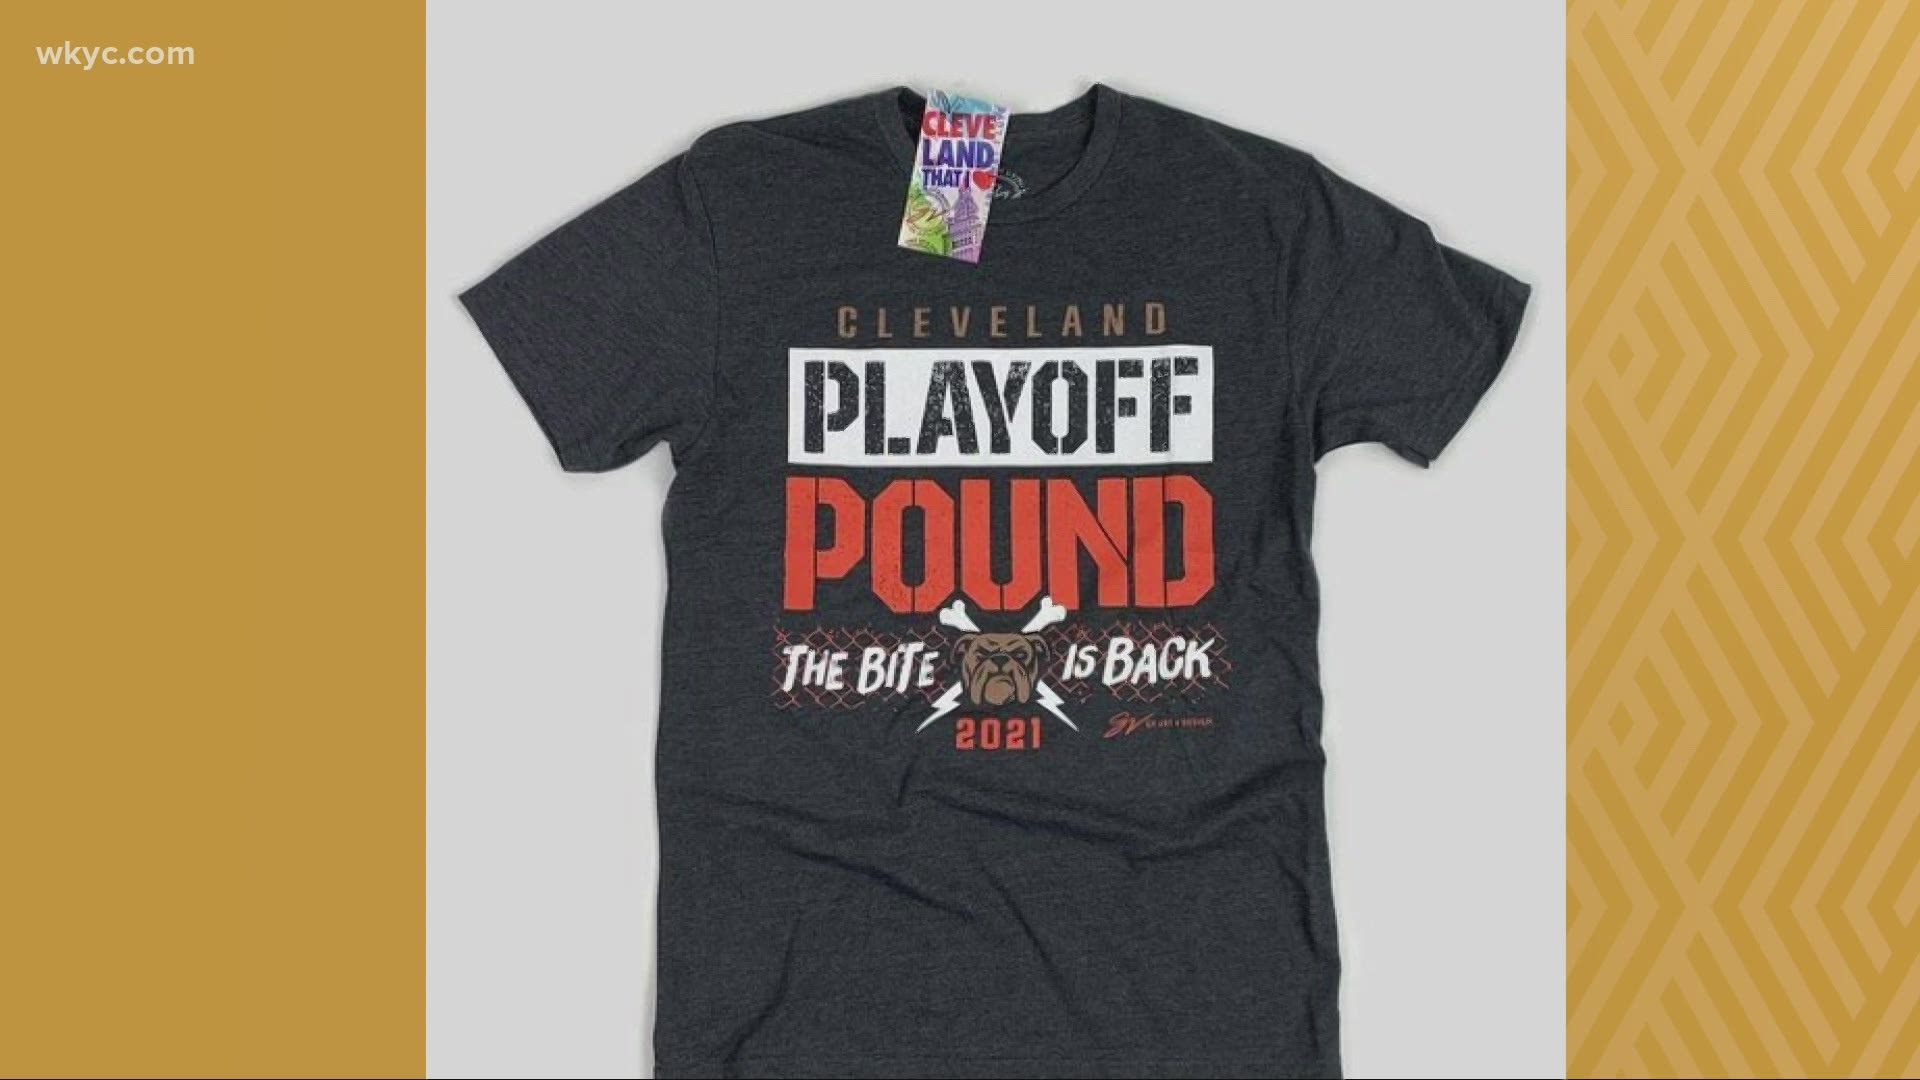 GV+ Art and Design has sold Browns gear for years, but their most recent shirt is different. The team was in for a big surprise.